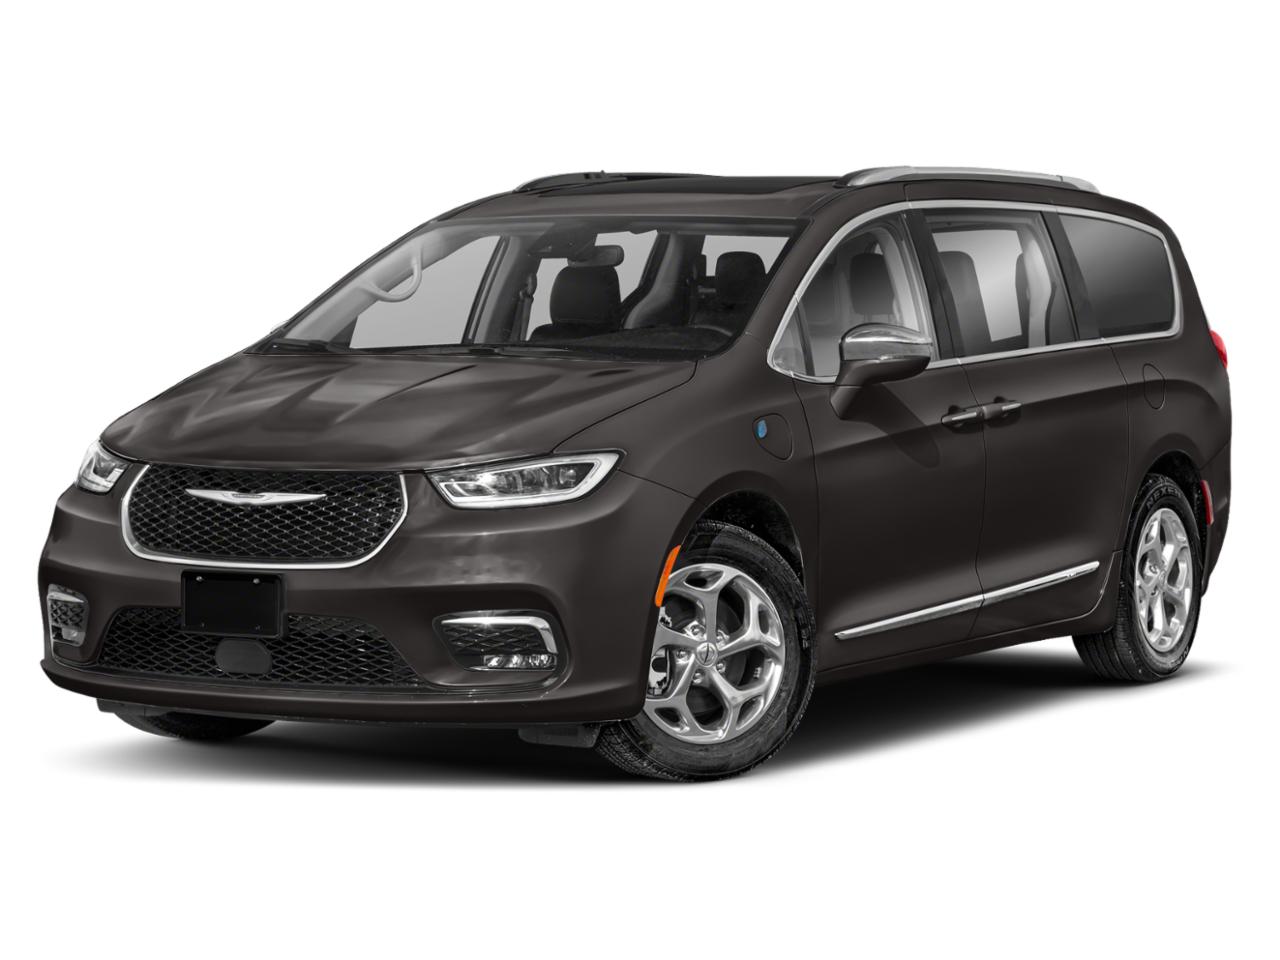 2021 Chrysler Pacifica Vehicle Photo in Ennis, TX 75119-5114